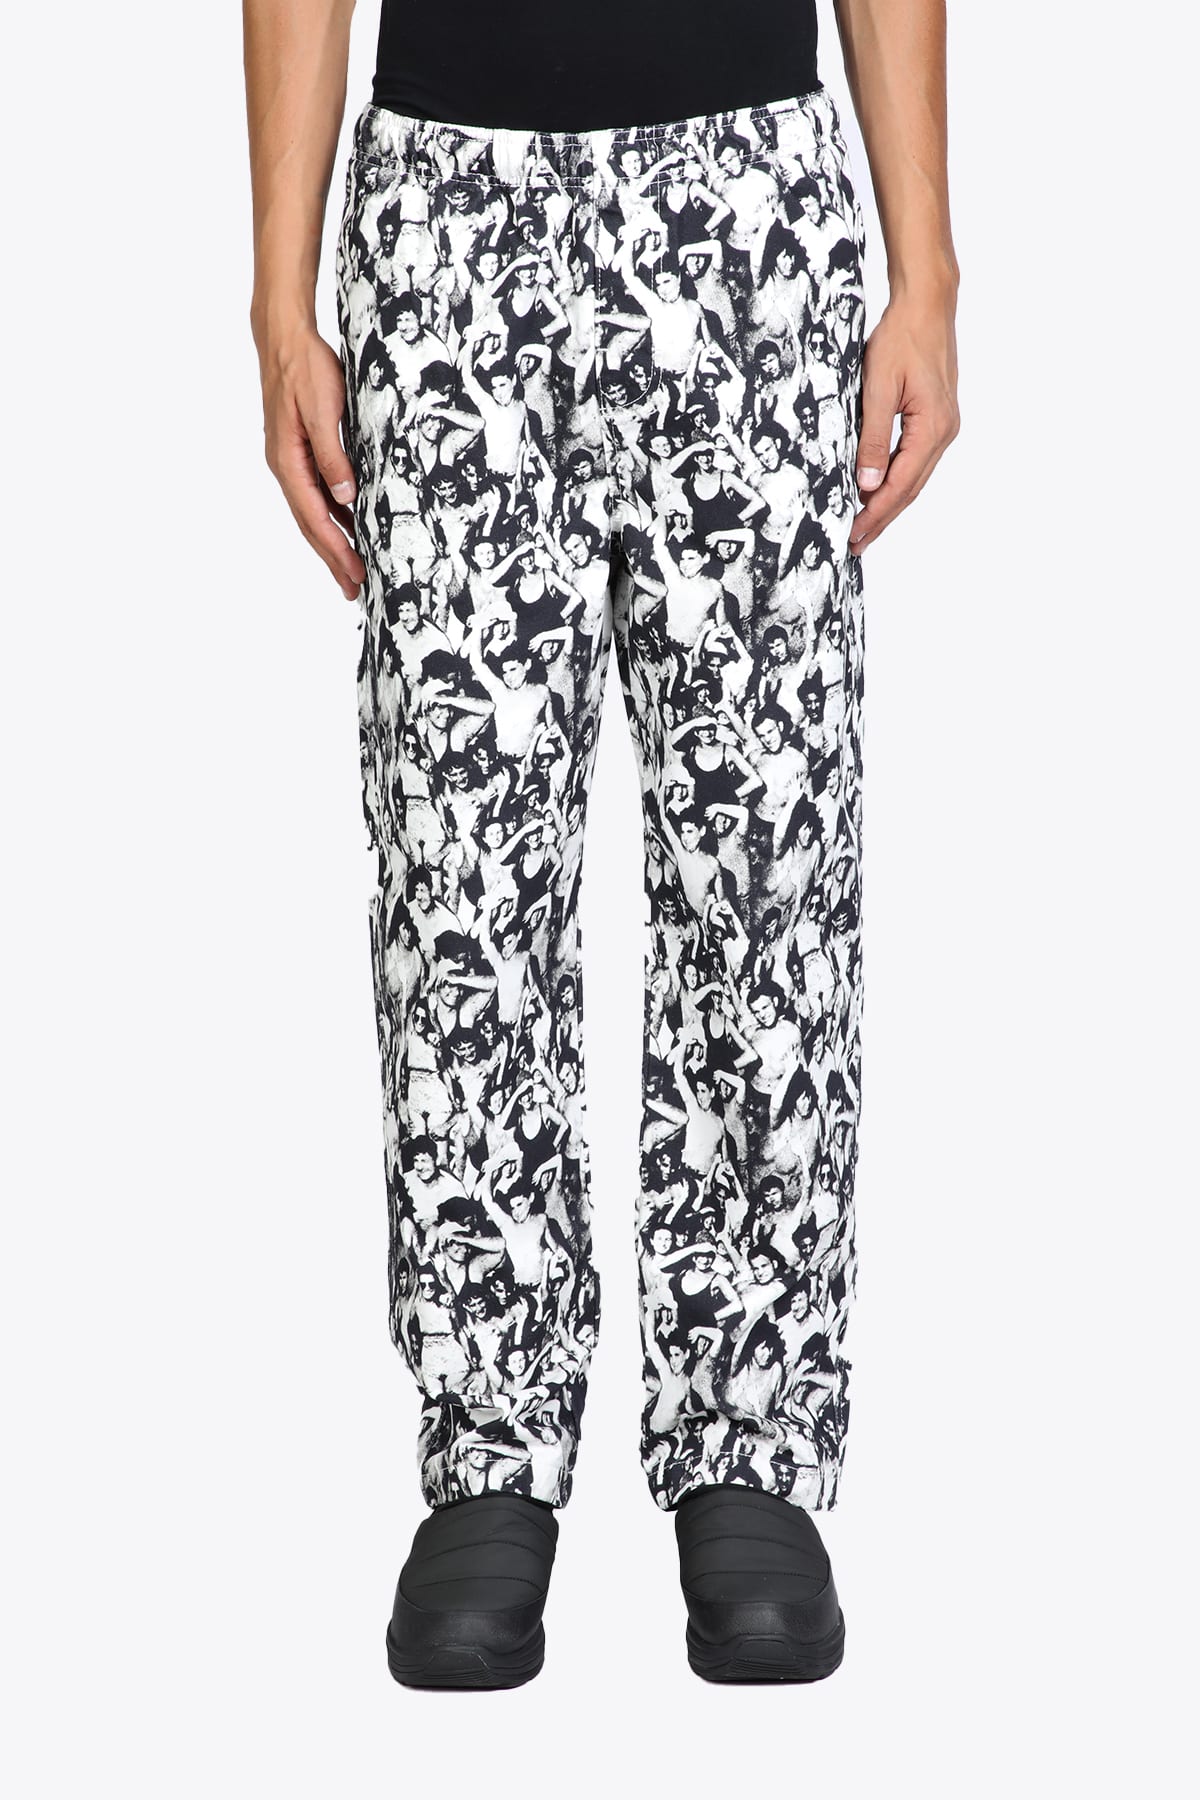 Stussy Mob Beach Pant Black and white all-over printed canvas pant - Mob beach pant